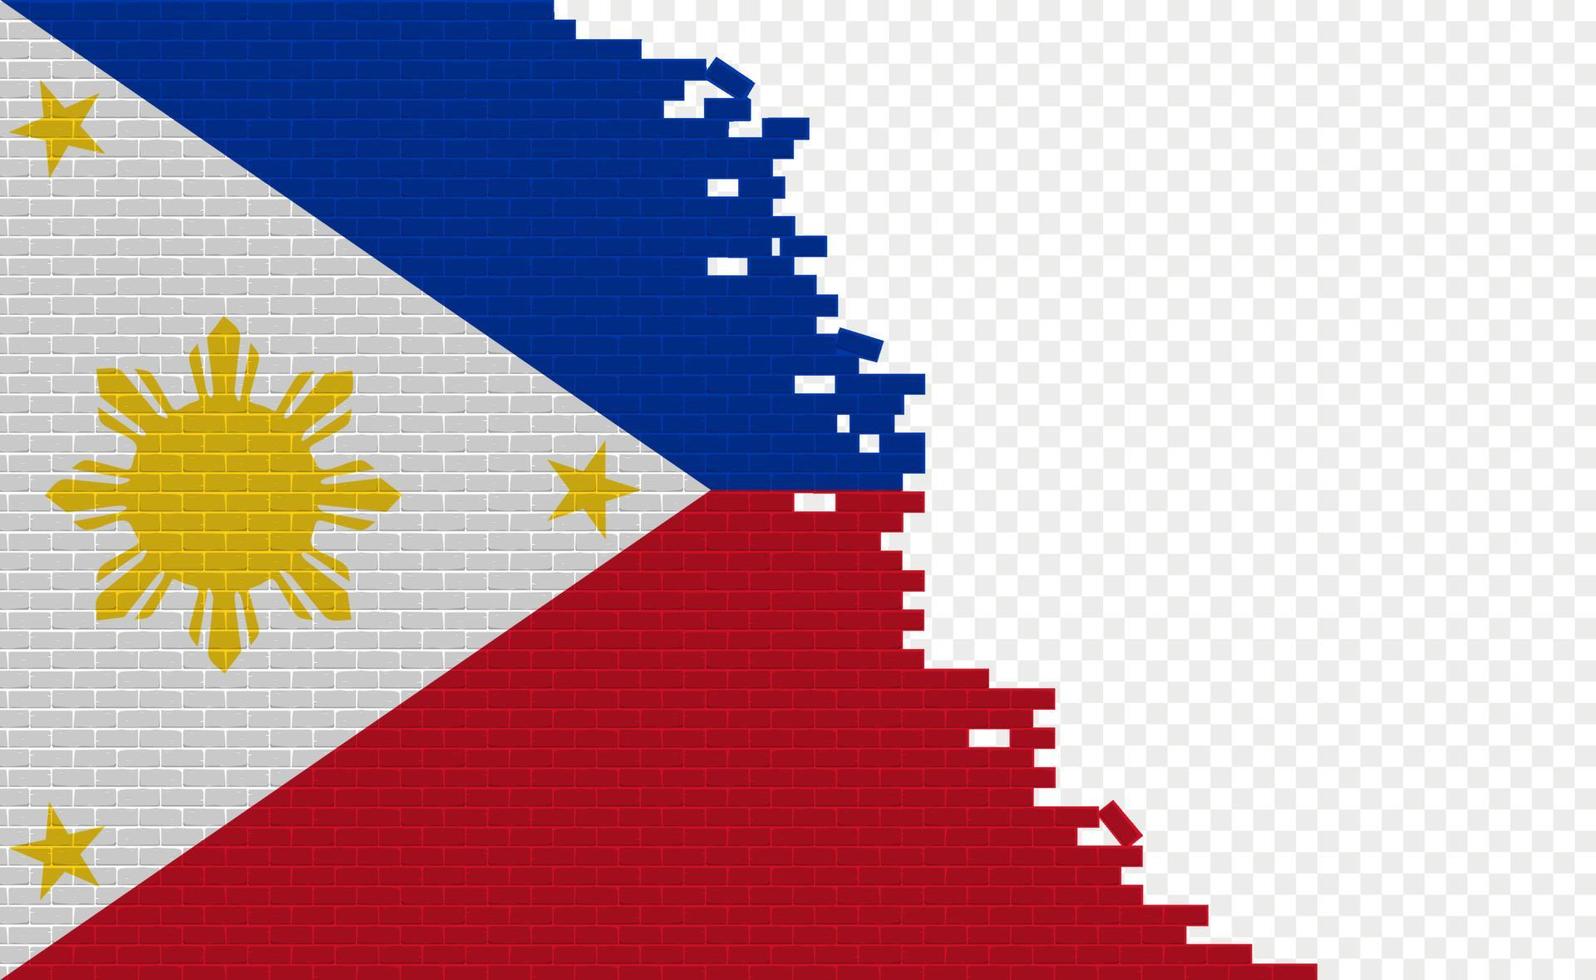 Philippines flag on broken brick wall. Empty flag field of another country. Country comparison. Easy editing and vector in groups.